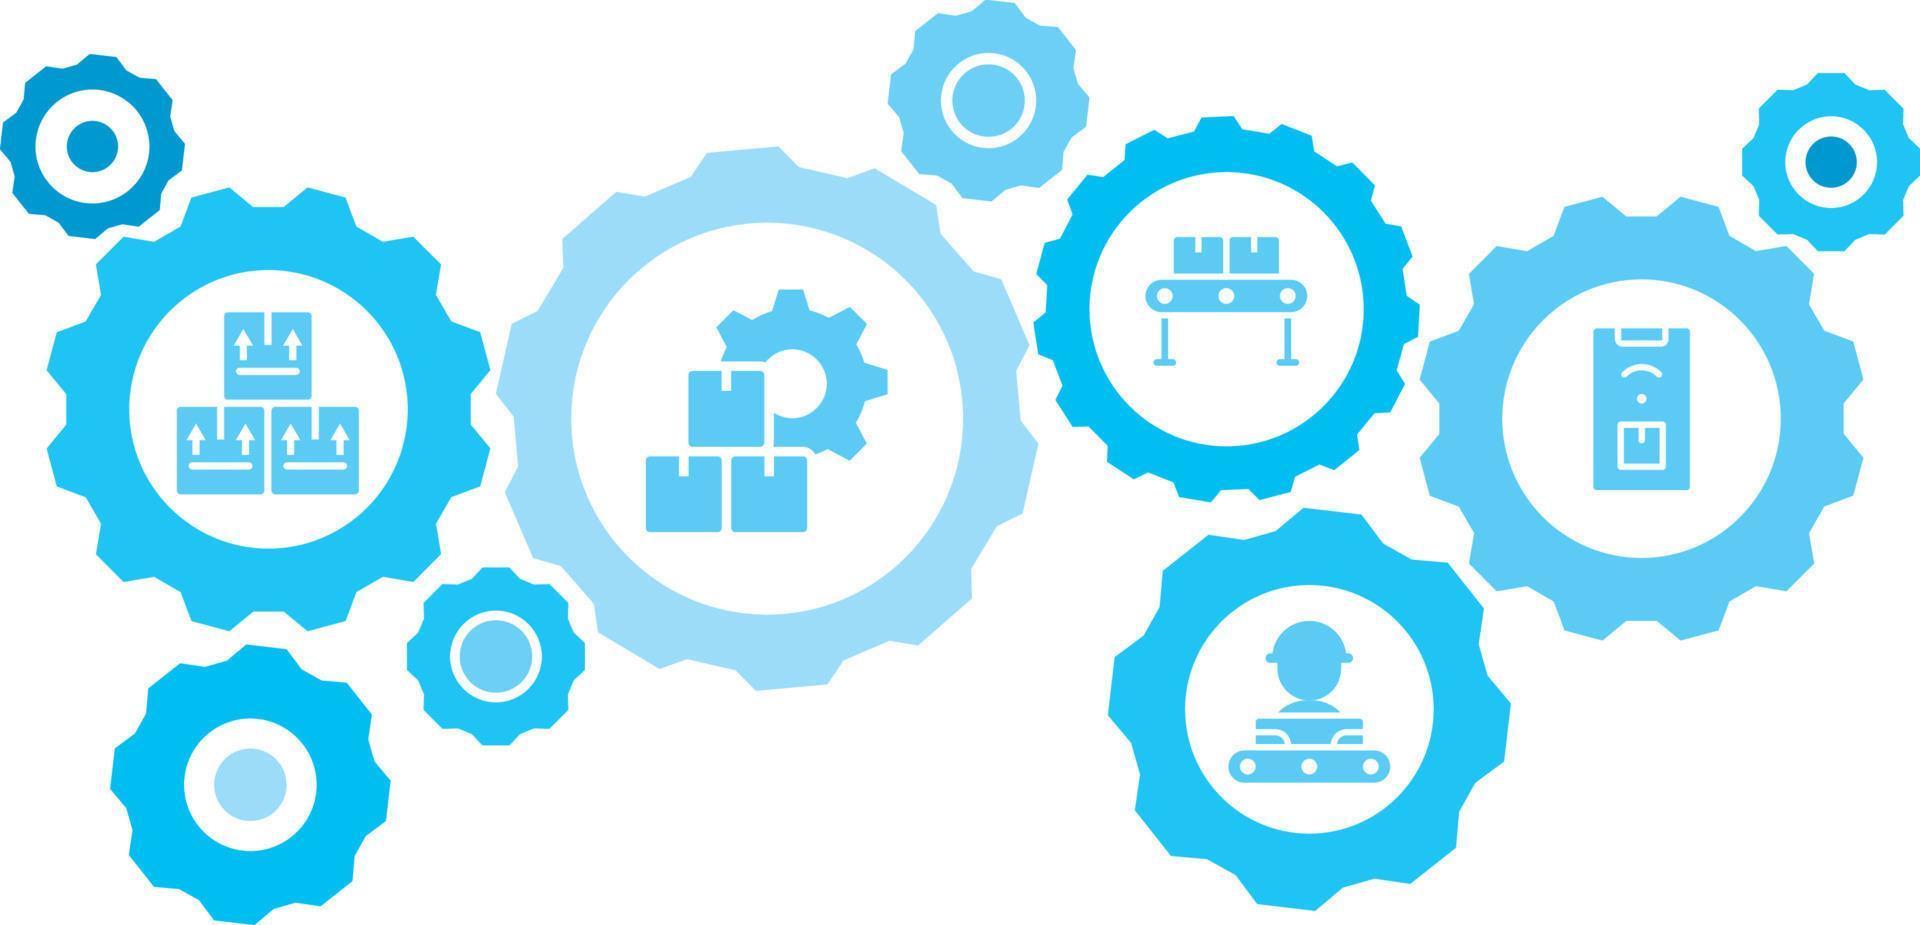 Connected gears and vector icons for logistic, service, shipping, distribution, transport, market, communicate concepts. Mass, production, app gear blue icon set on white background